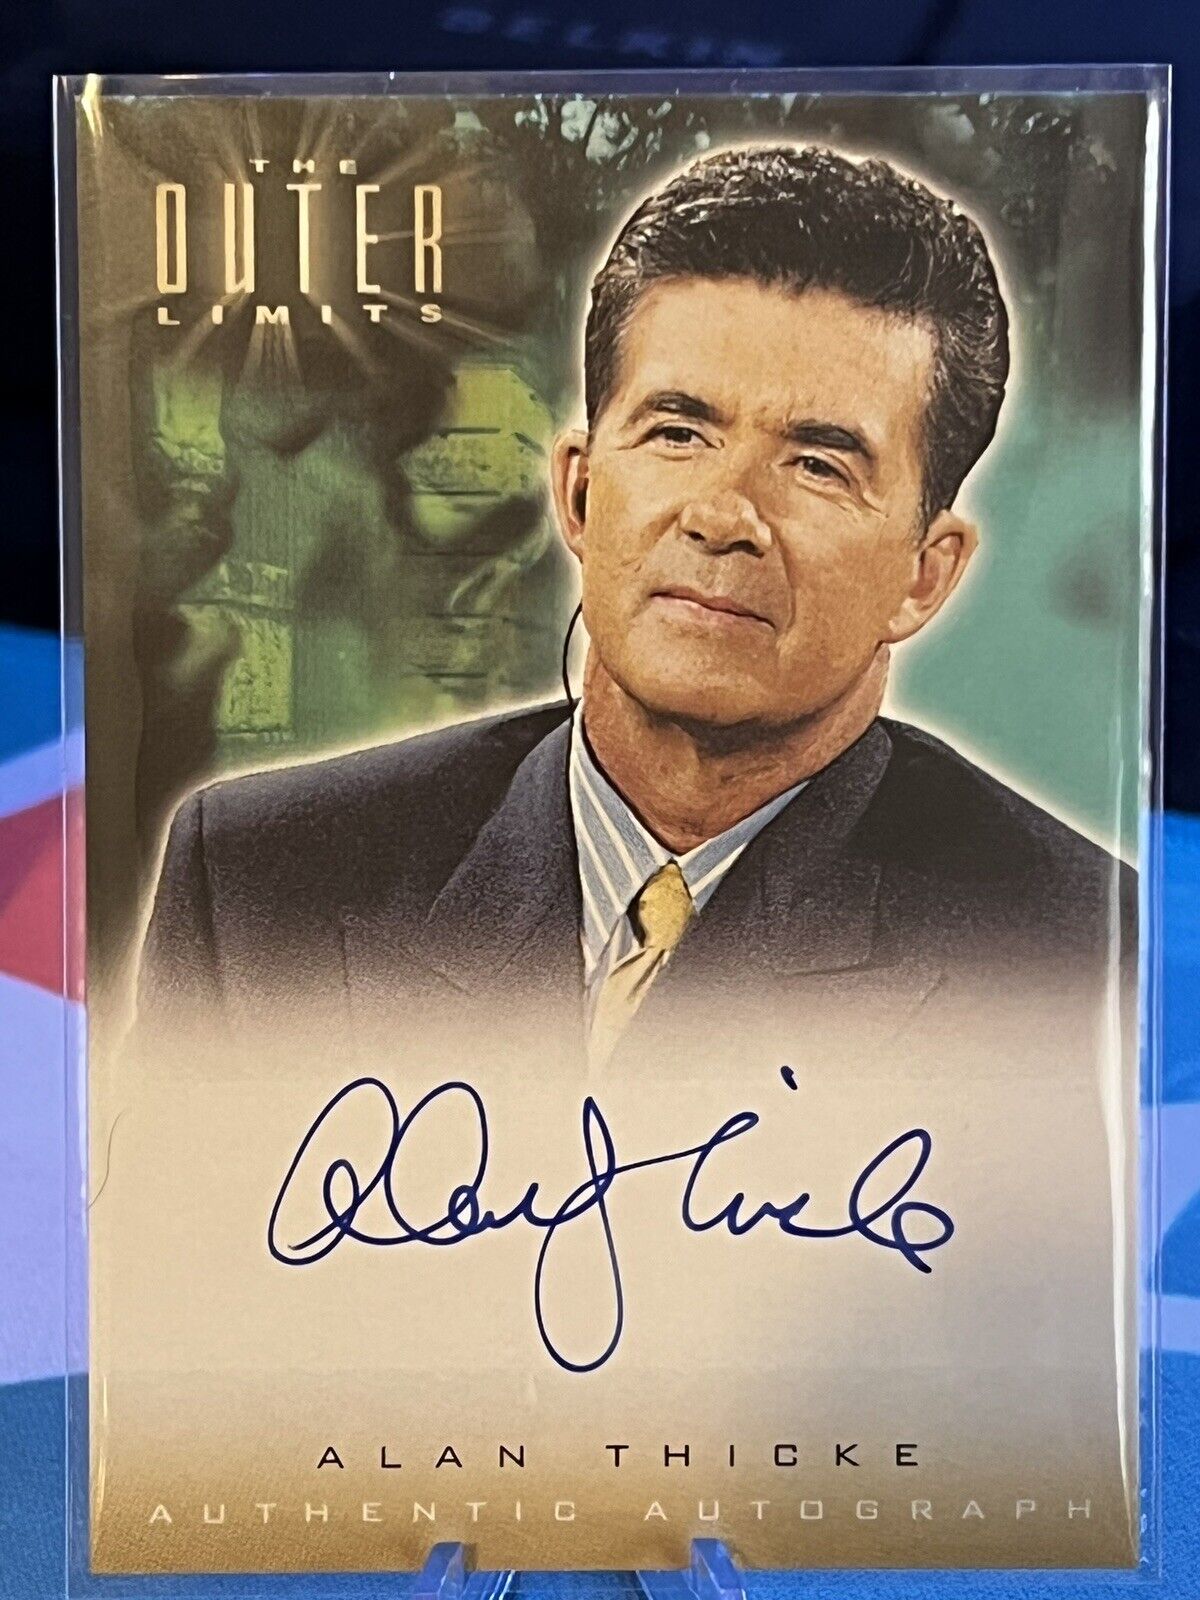 The Outer Limits Alan Thicke as Donald Rivers Autograph Card